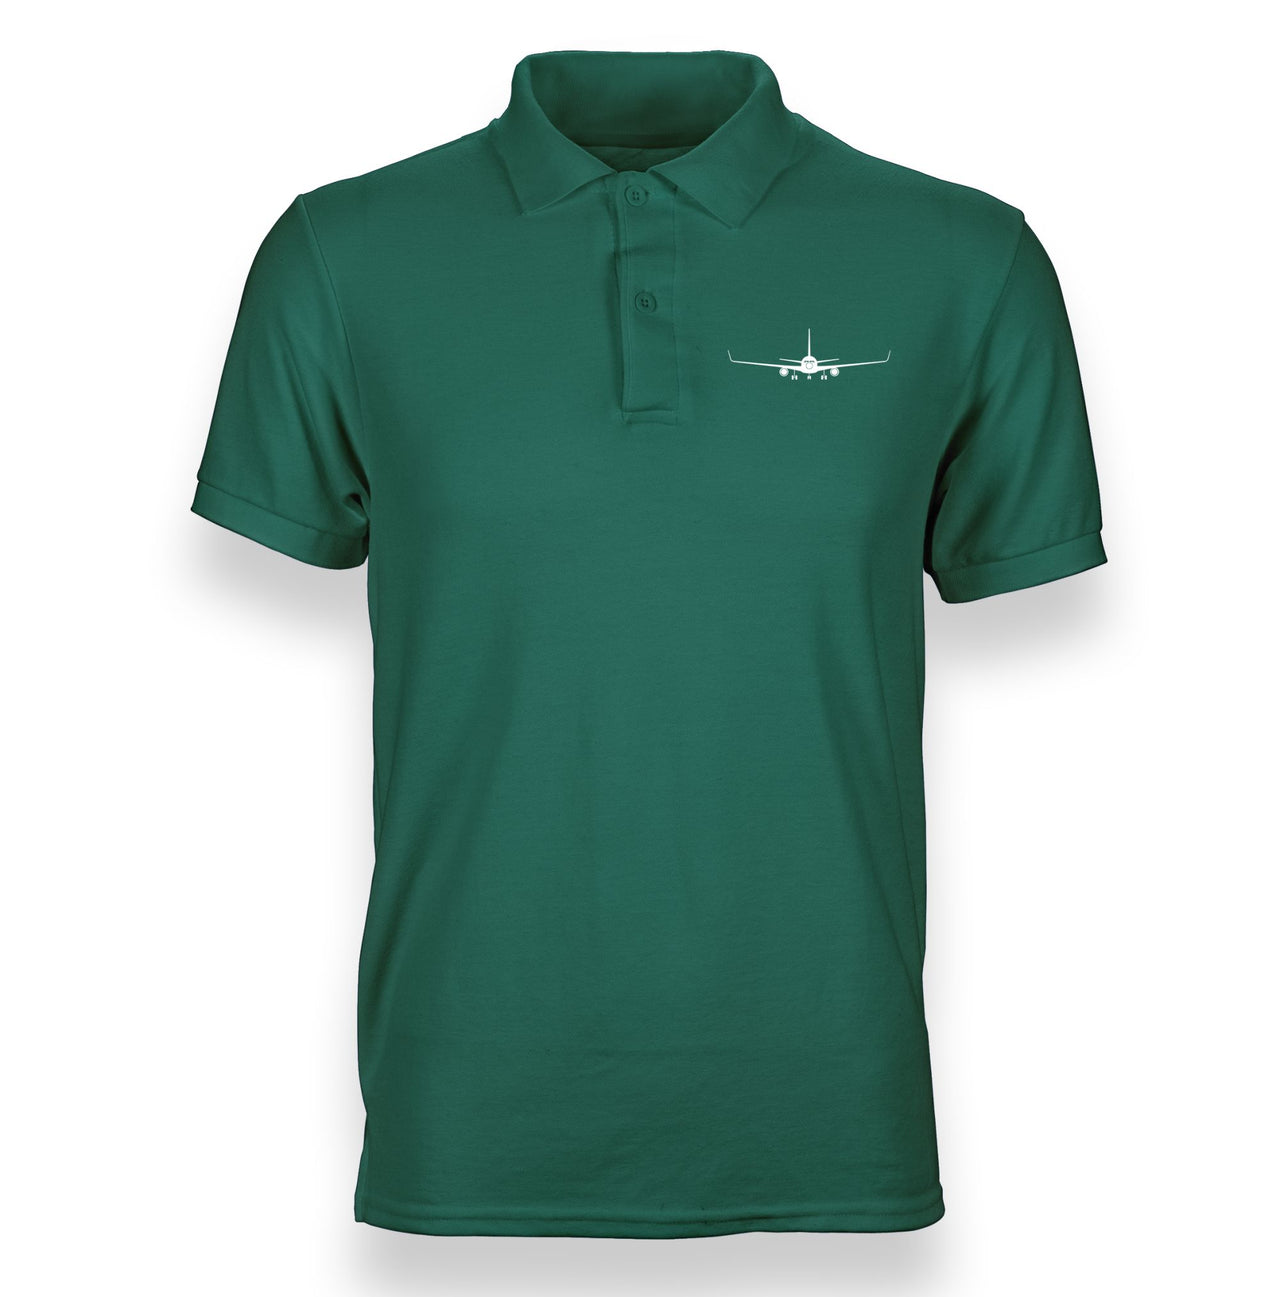 Boeing 767 Silhouette Designed "WOMEN" Polo T-Shirts